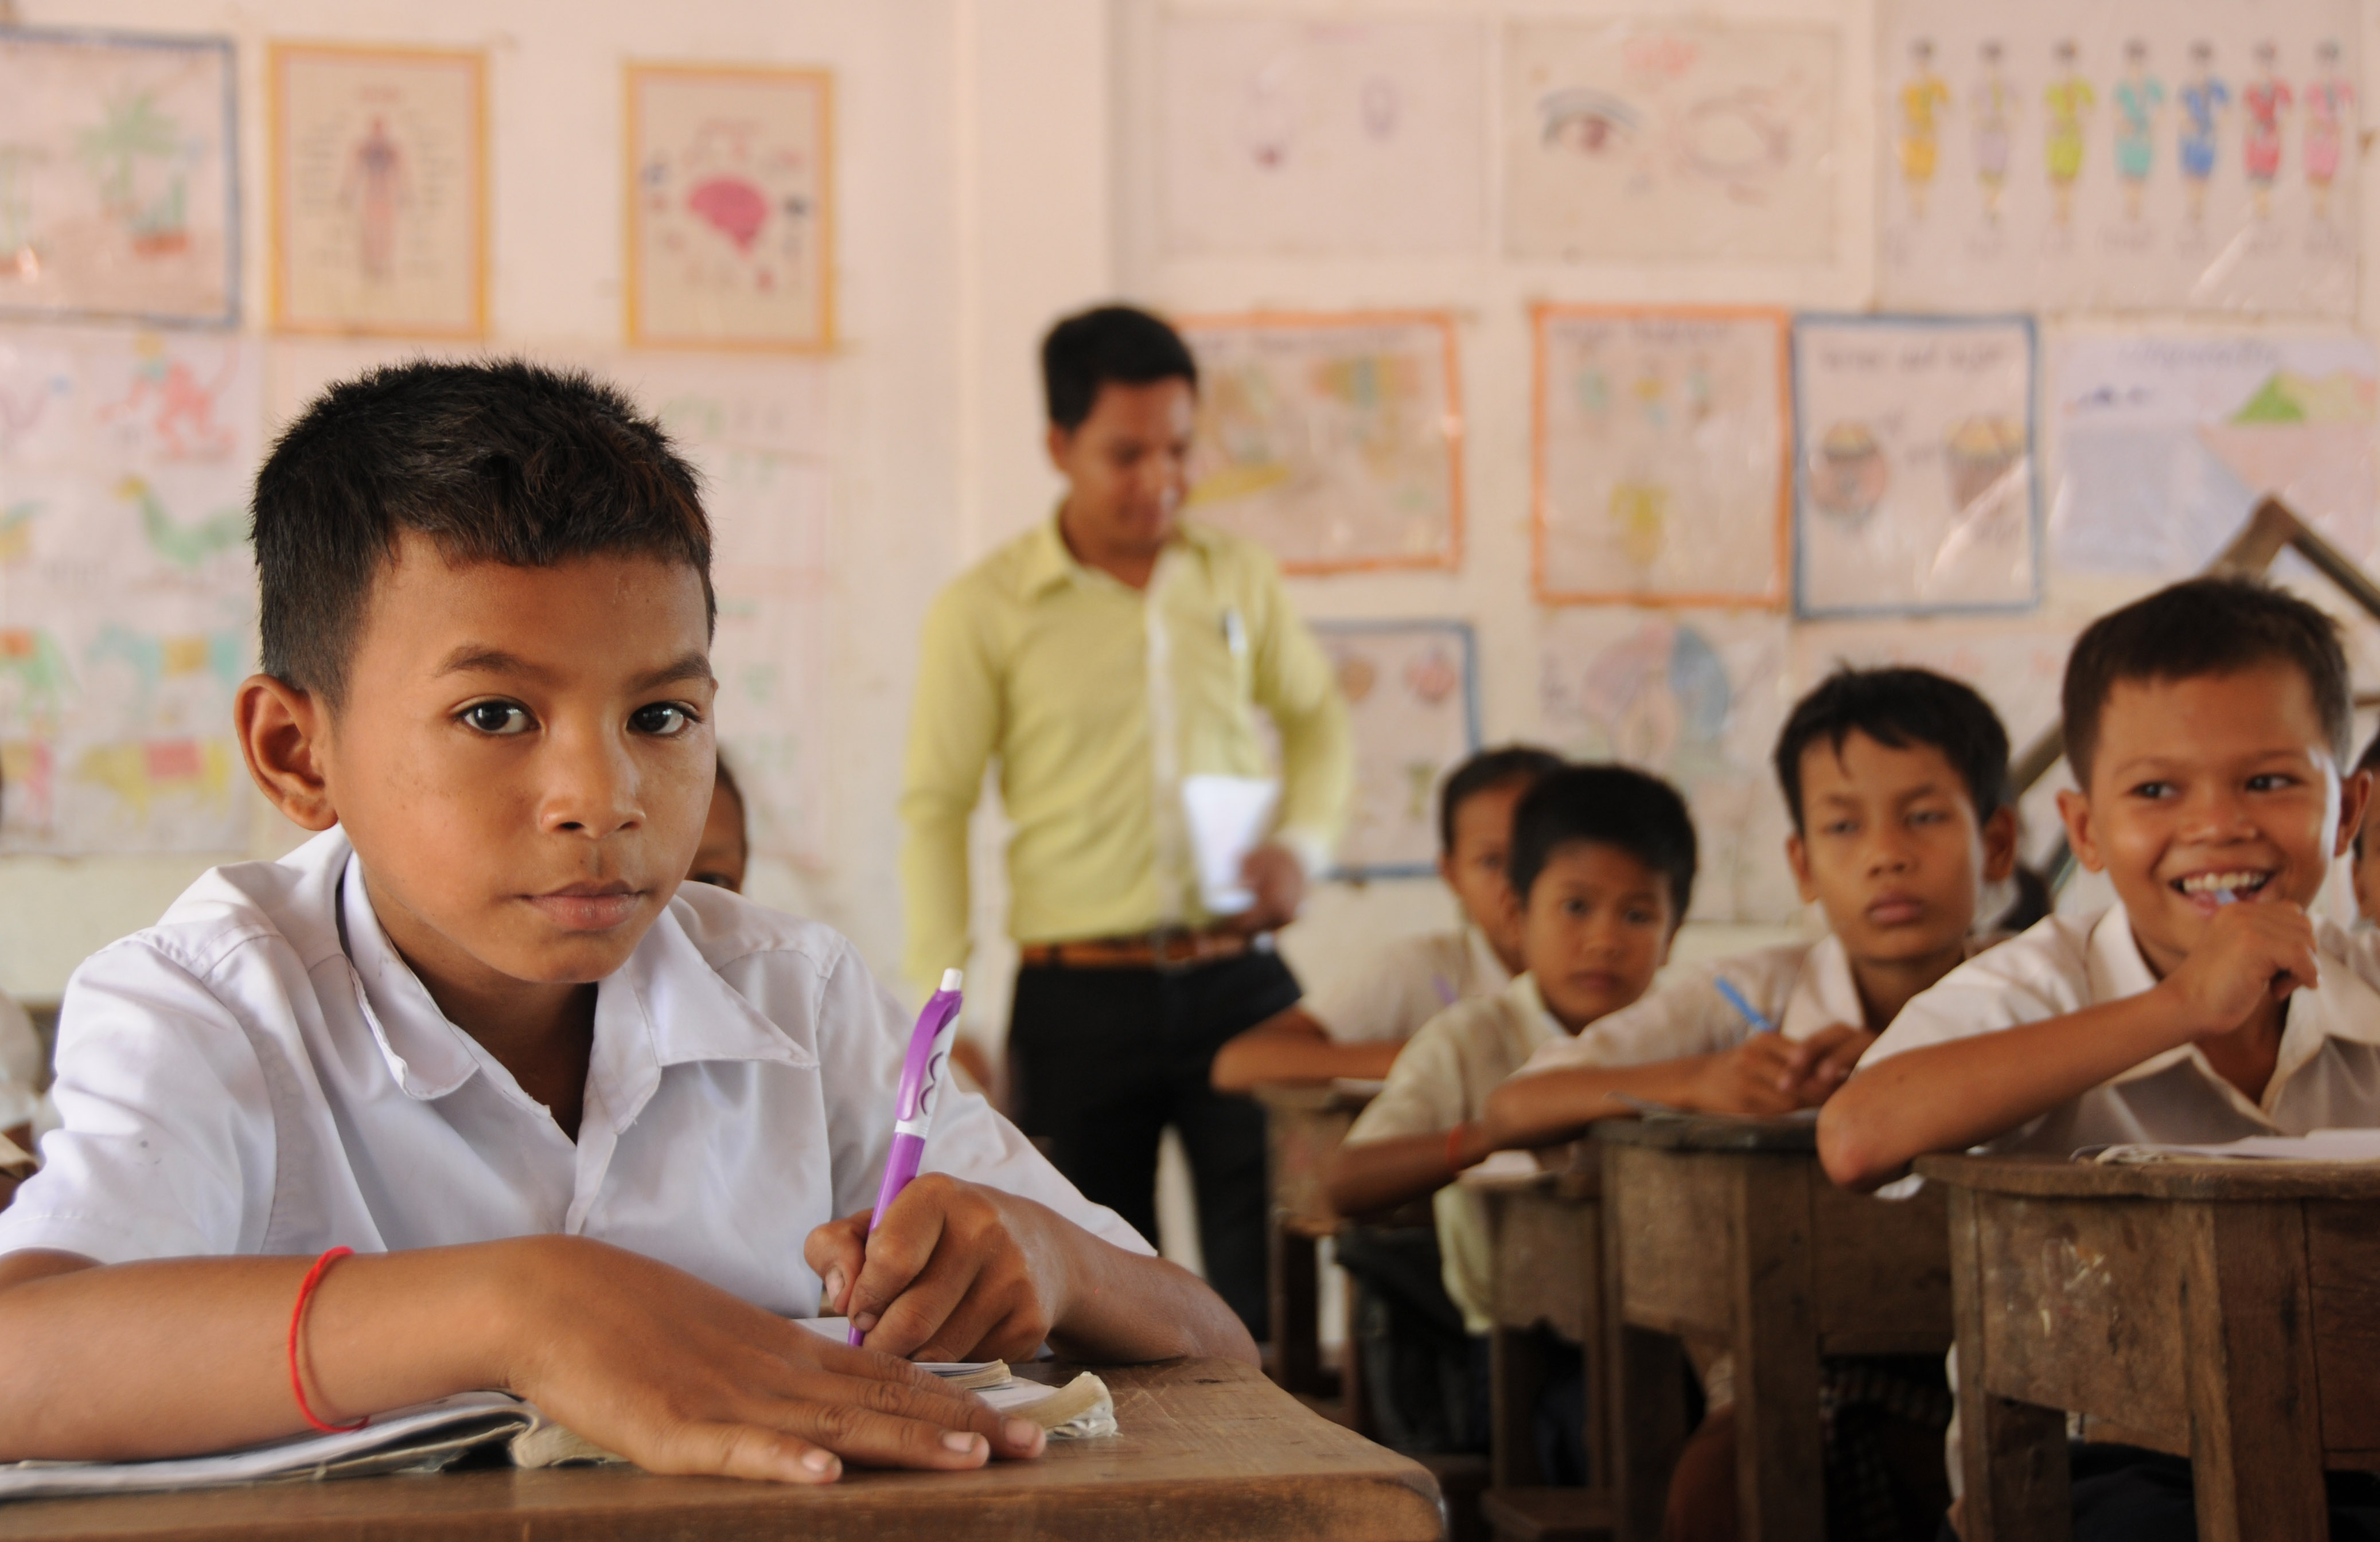 Nary's younger brother is in his classroom at grade six under the supporting from his sacrificing older sister of her schooling and his father to work on the construction site in a rural area of Siem Reap province.